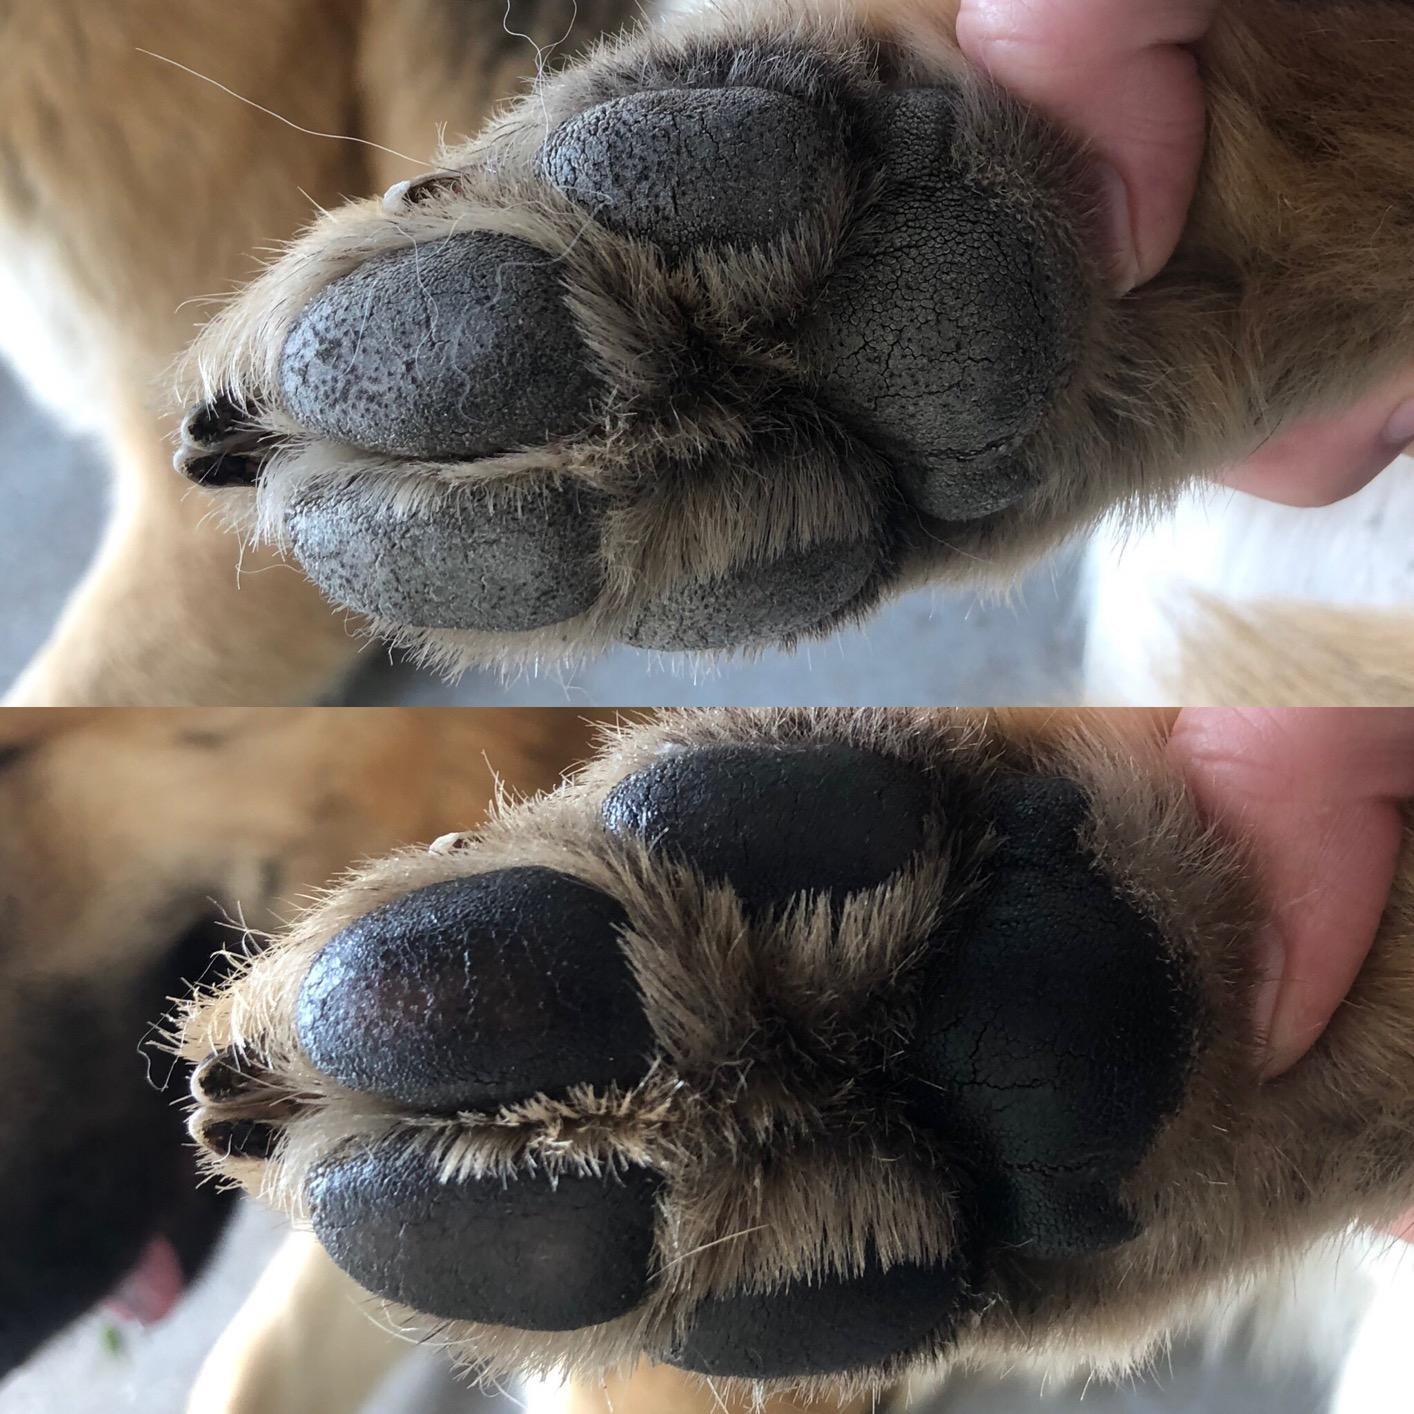 before: paw looking crusty and dry after: paw looking smooth and darker